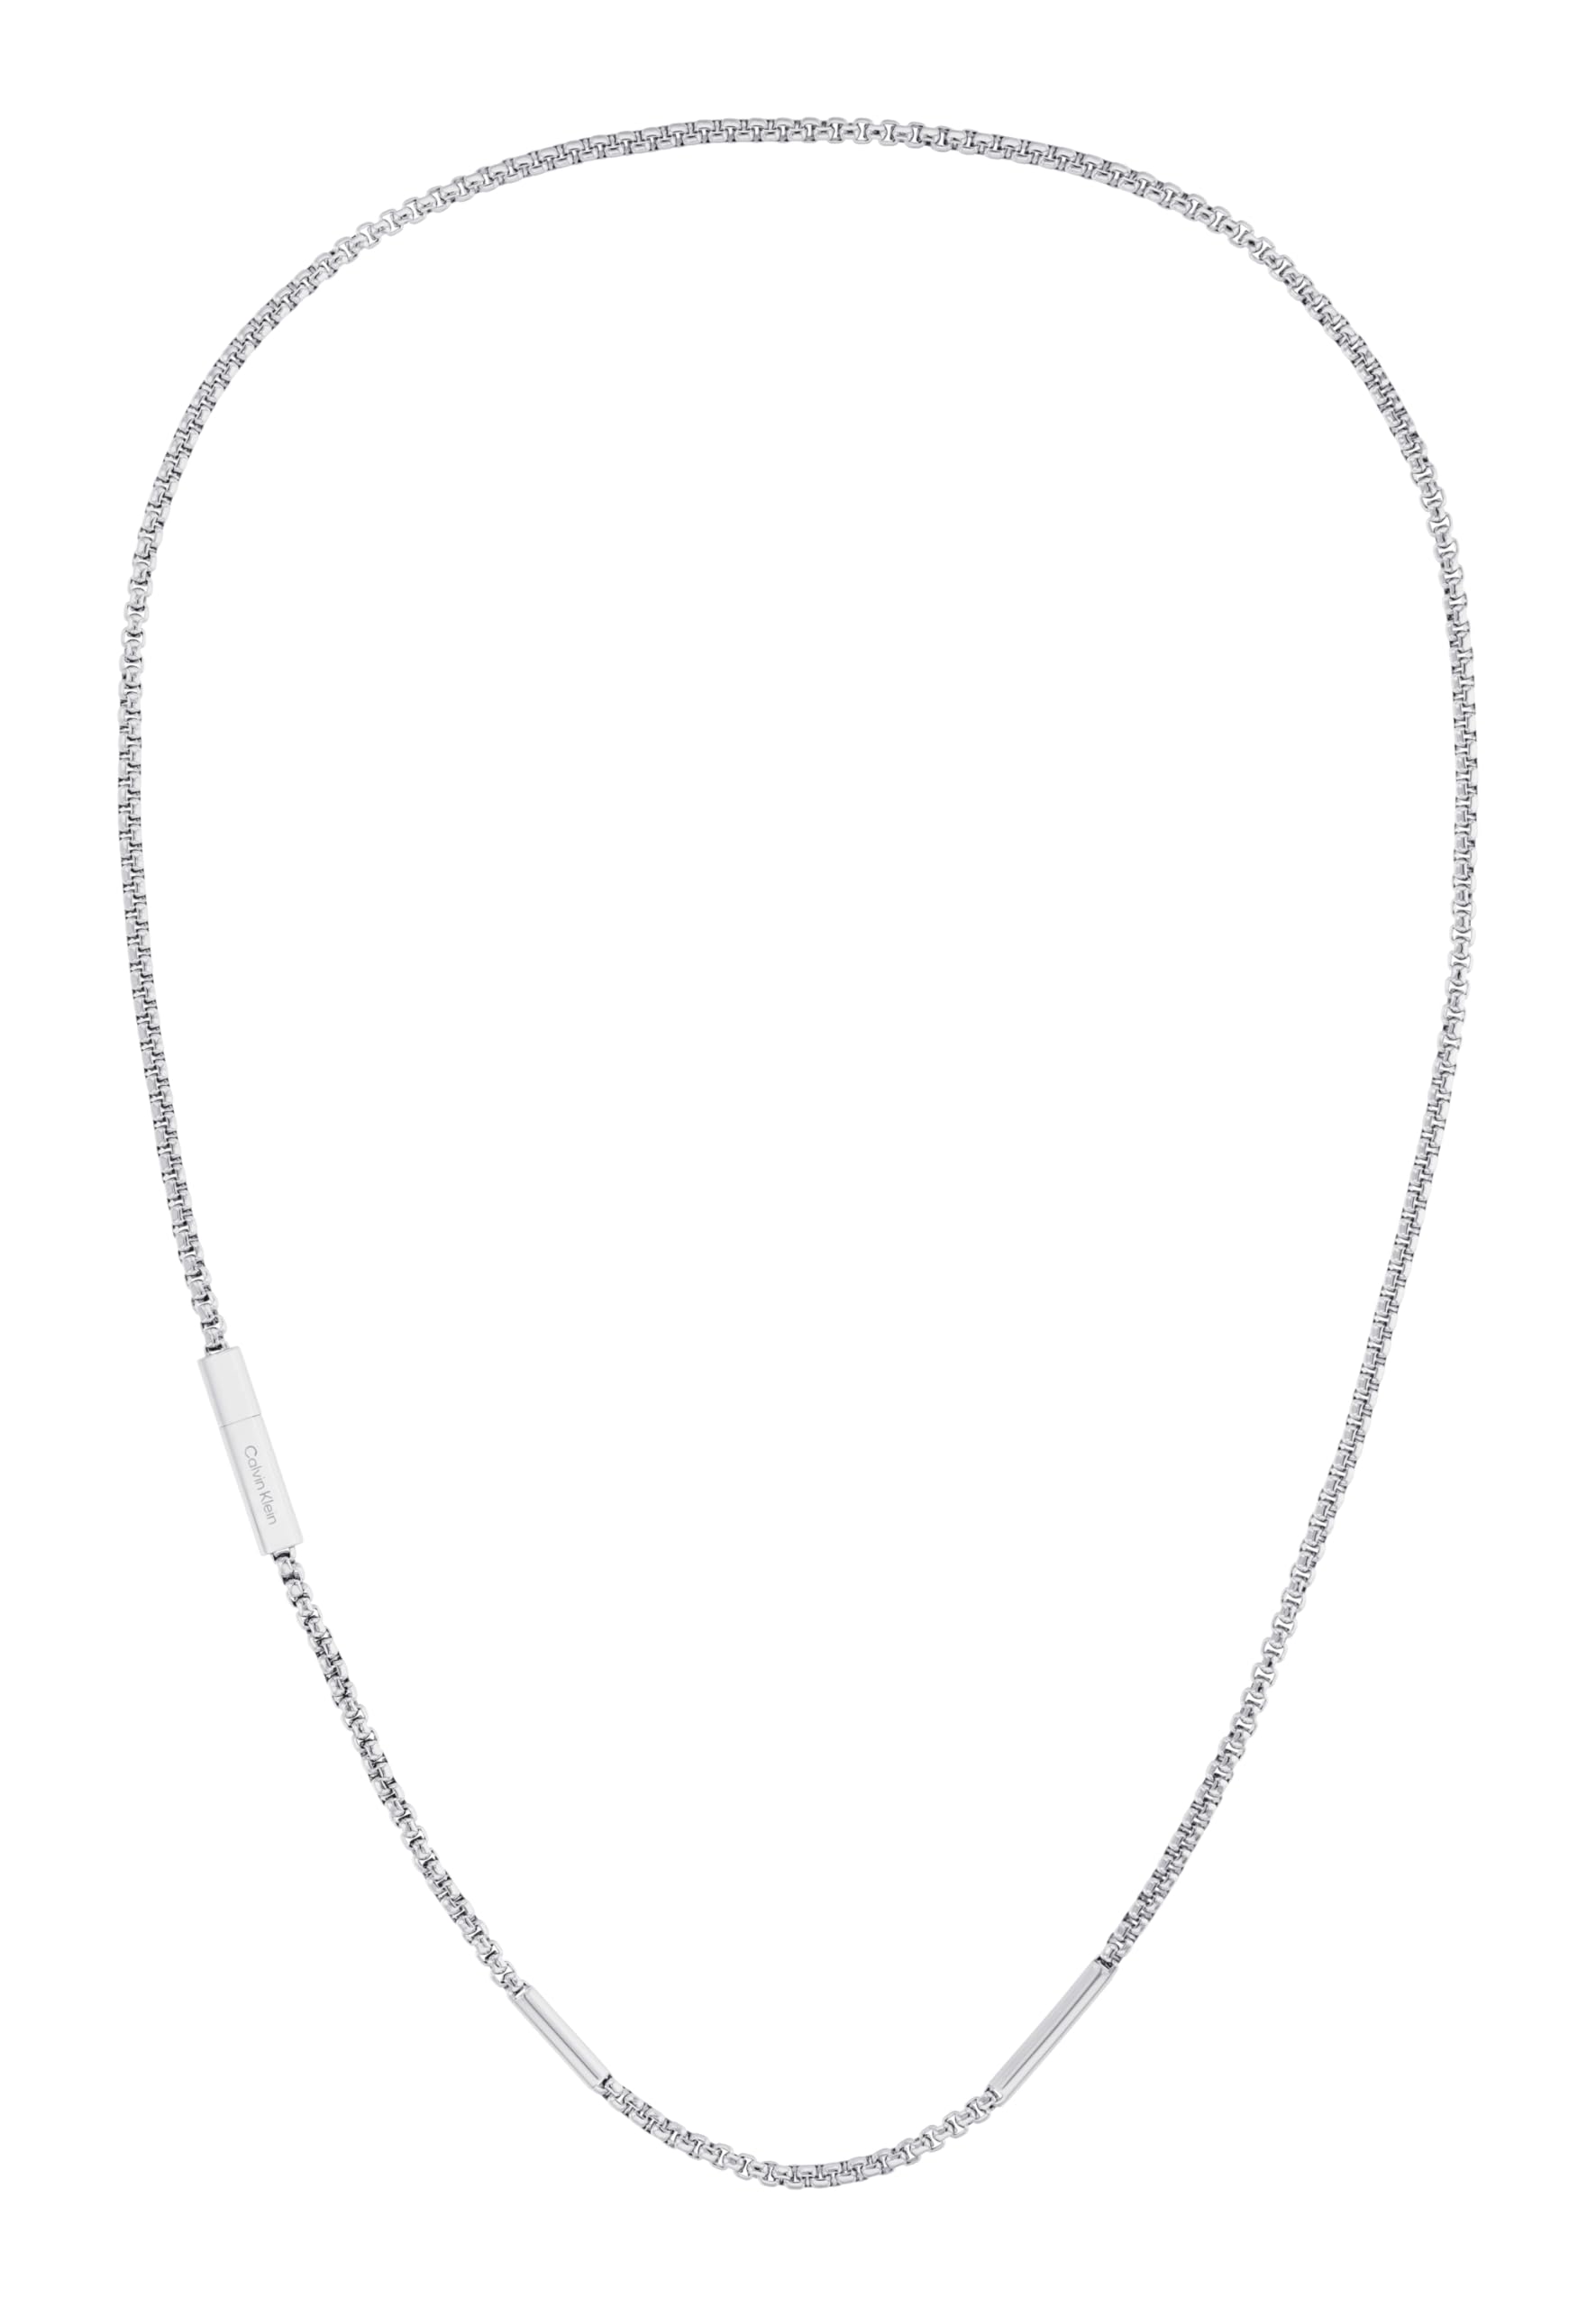 Calvin Klein Cylinder Links Collection for Men, Stainless Steel Chain Necklace, High Polish, Magnetic Closure, Elegant Jewelry, For Him